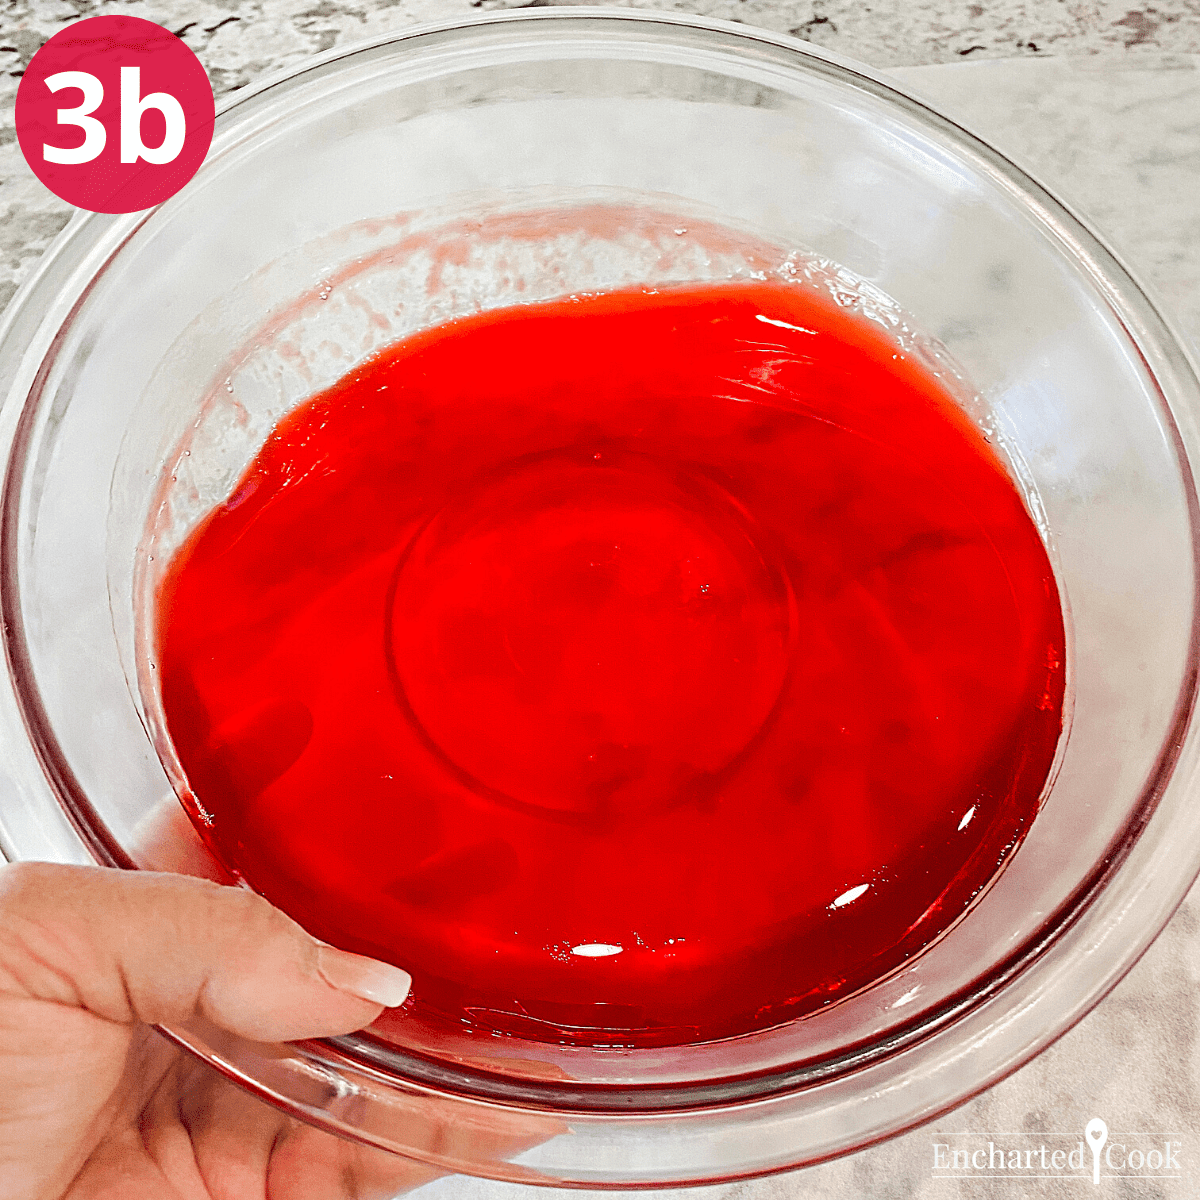 The Jell-O is slightly set when it clings to the edge of the bowl and slides away from the edge when the bowl is tipped.